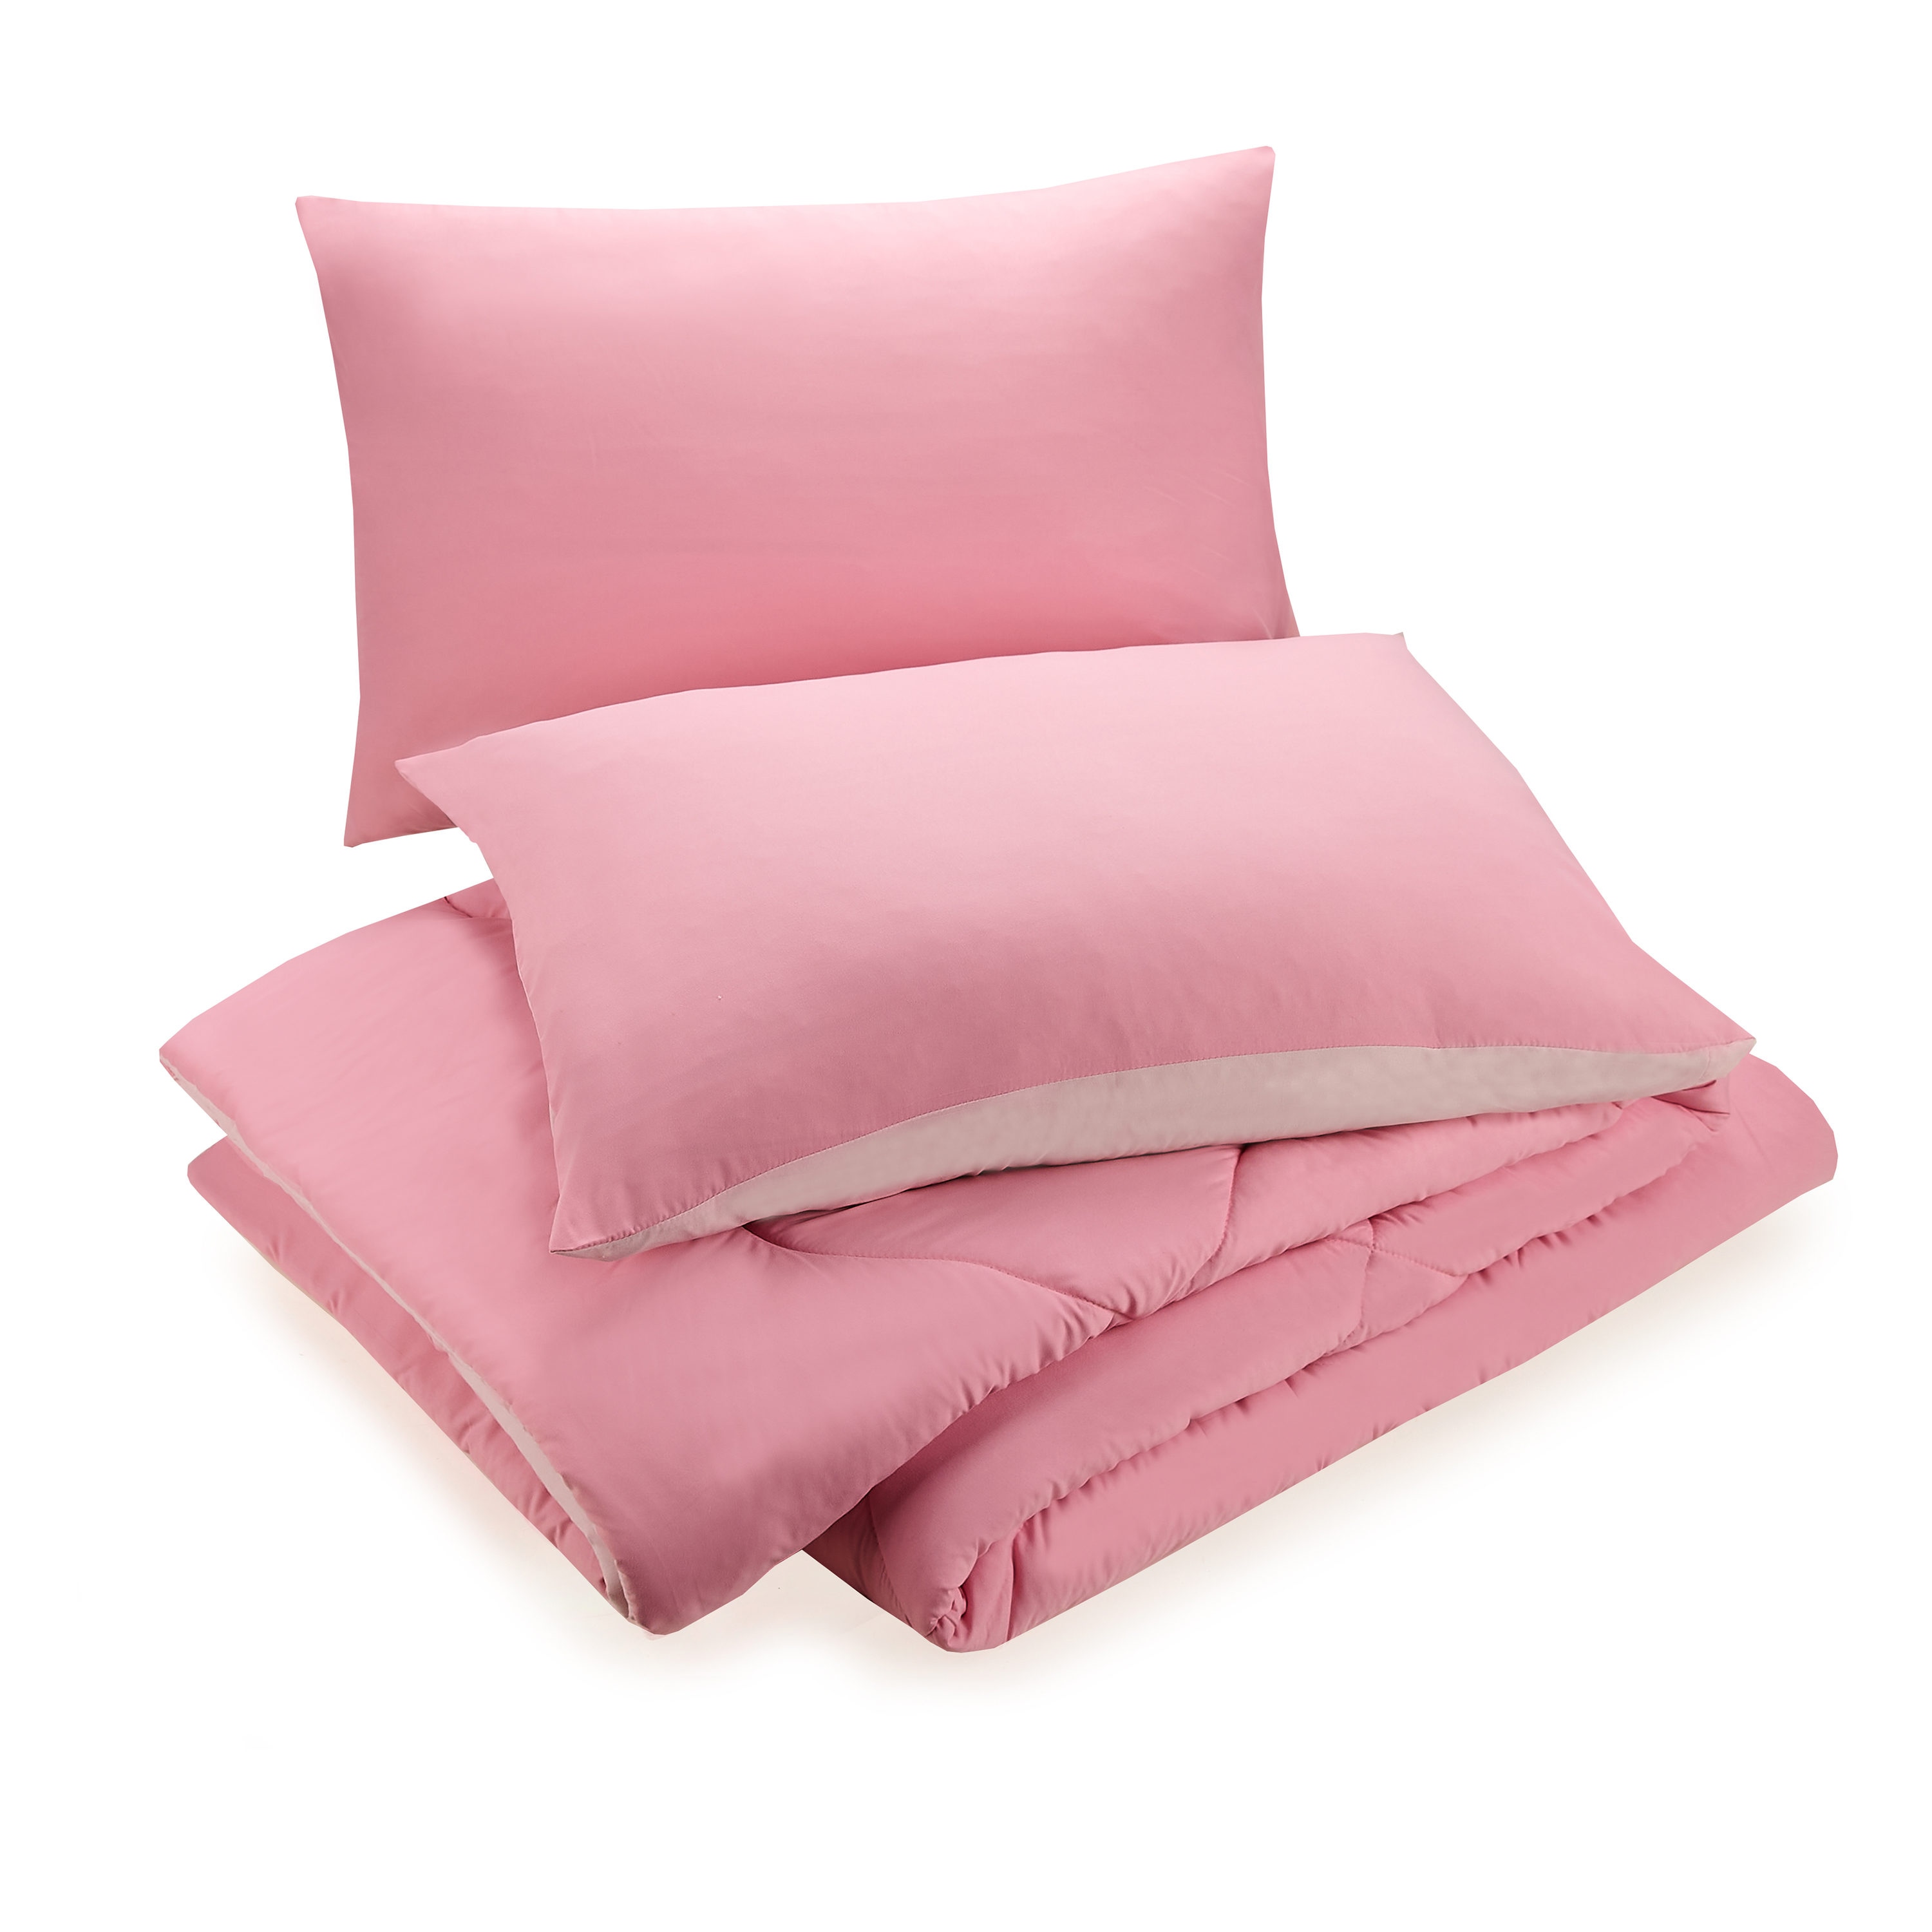 Urban Playground Pretty In Paris Reversible Comforter Set, Color: Pink -  JCPenney